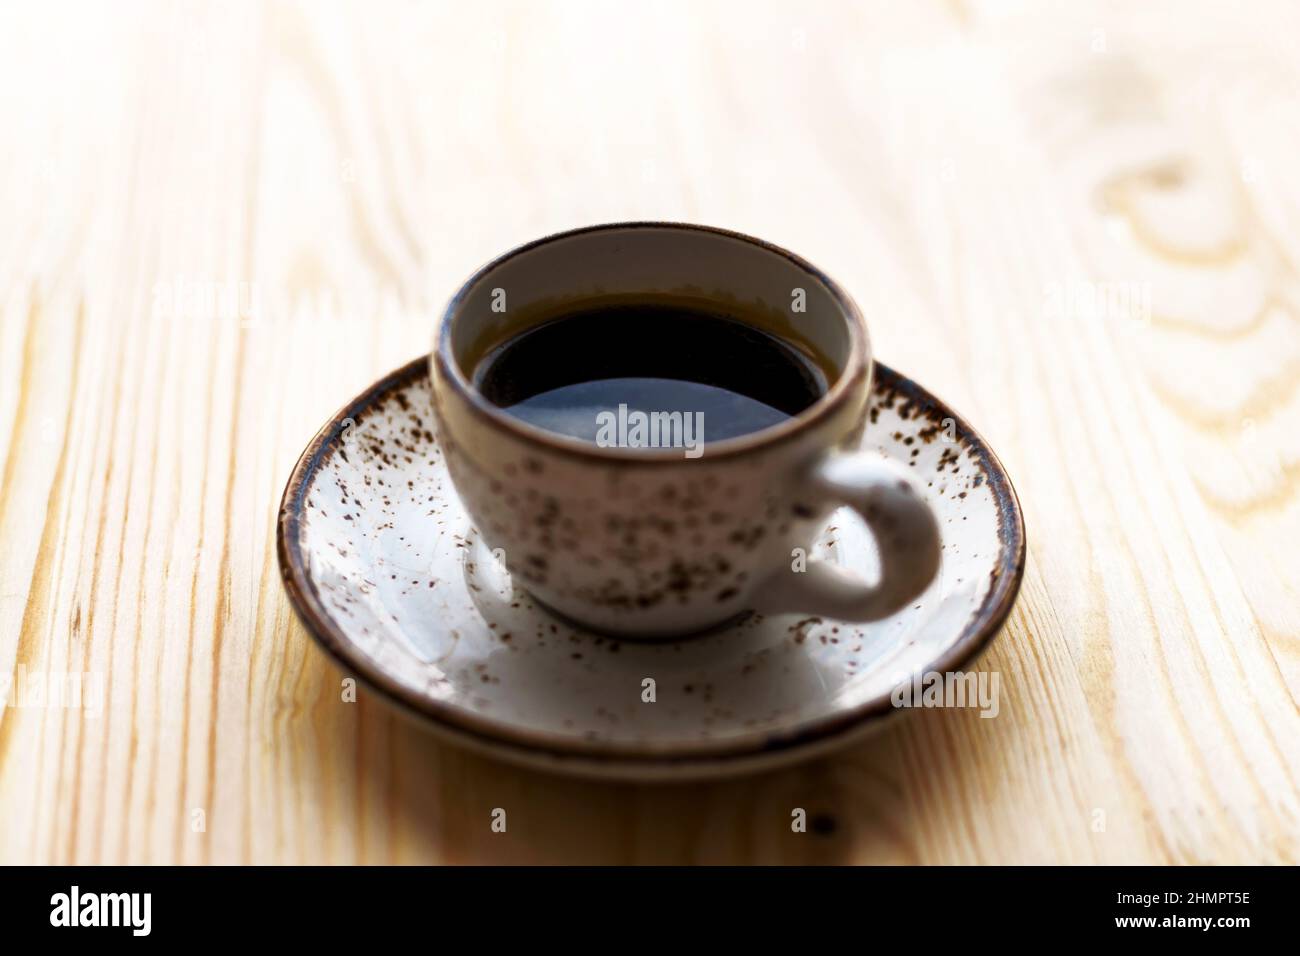 Cup of Coffee espresso on saucer on wooden table background. Sunny morning breakfast concept. Stock Photo